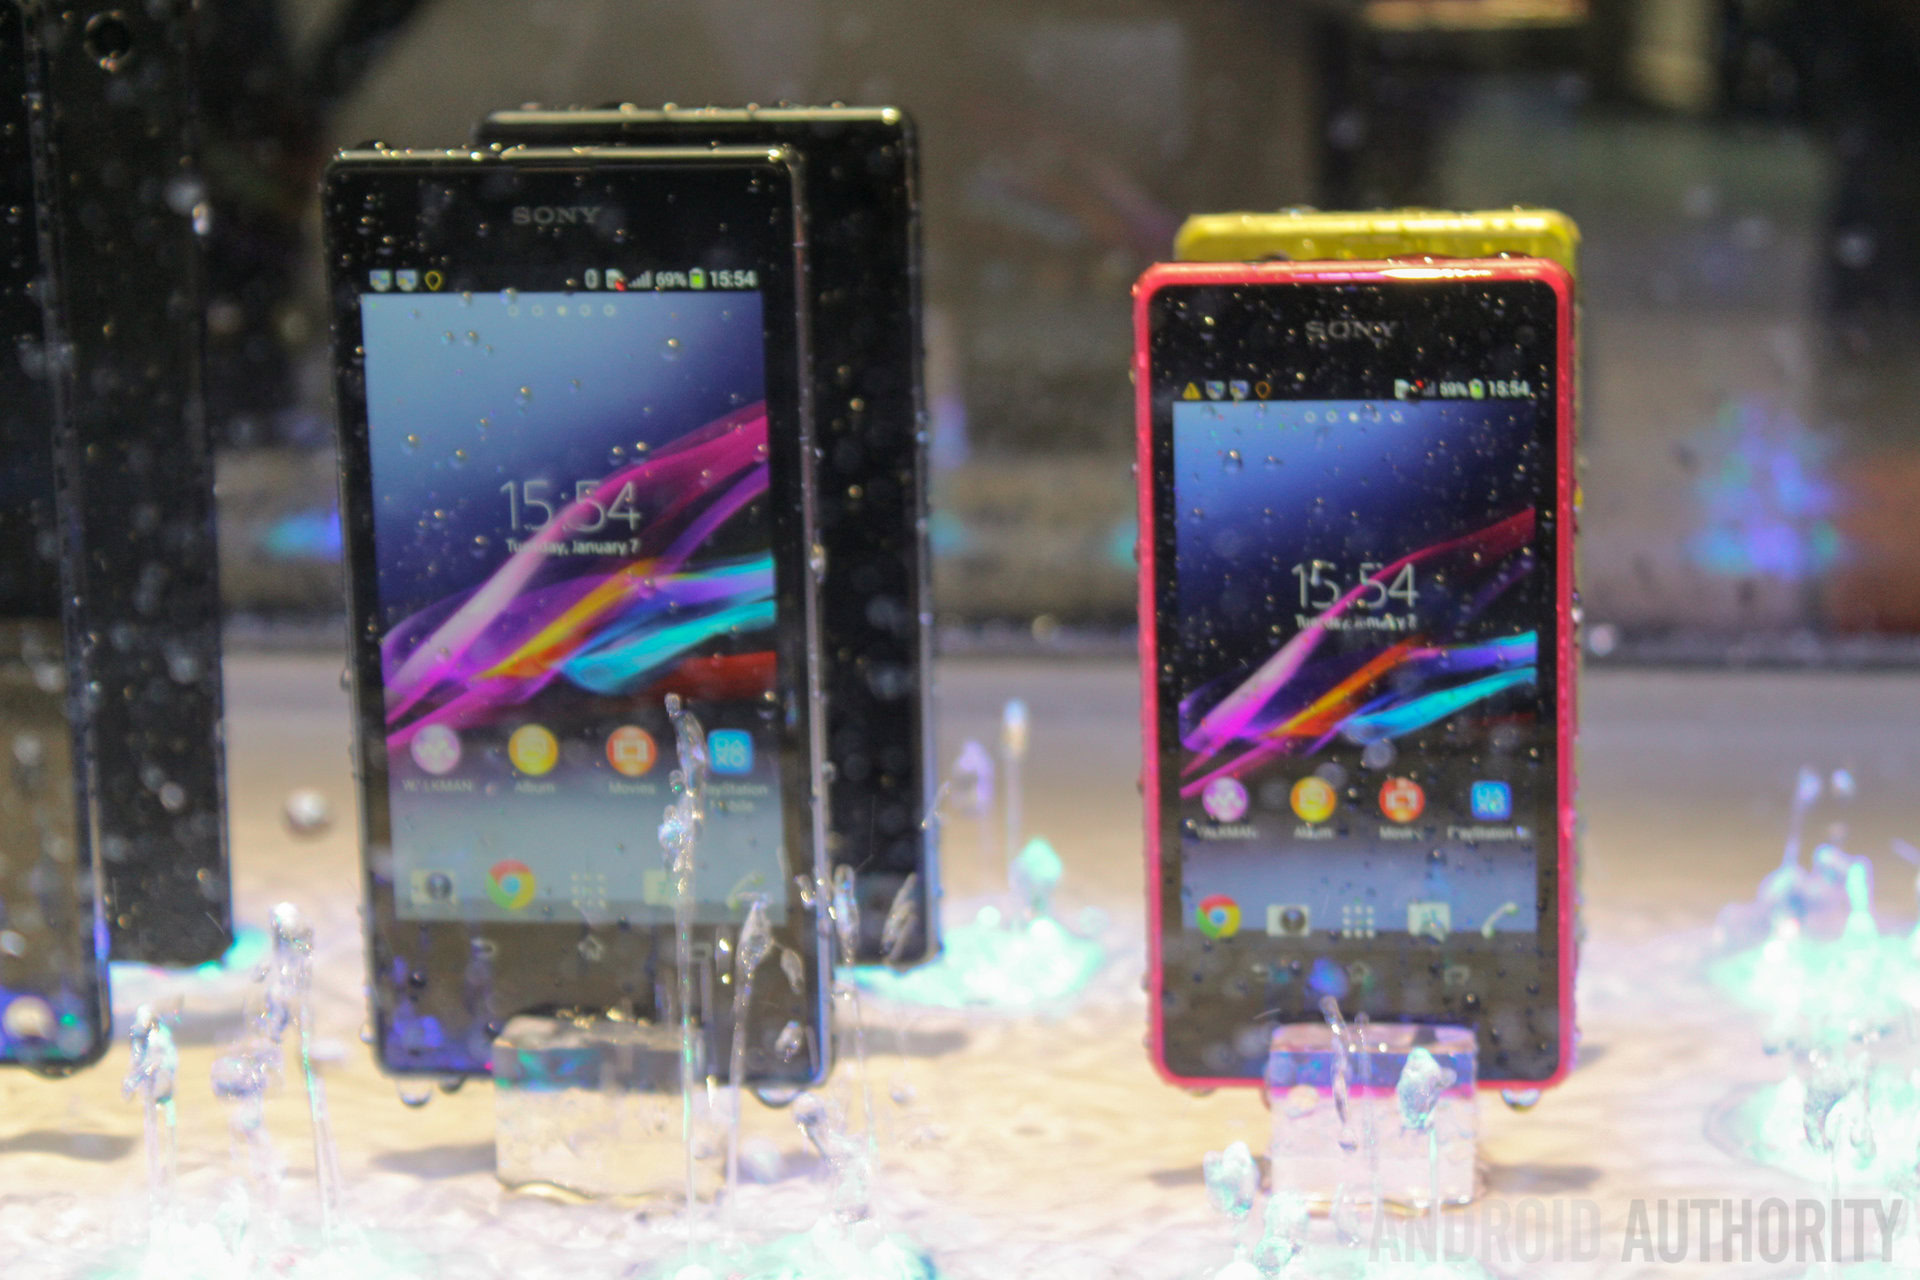 Sony Xperia Z1 Compact Waterproof CES 2014-4